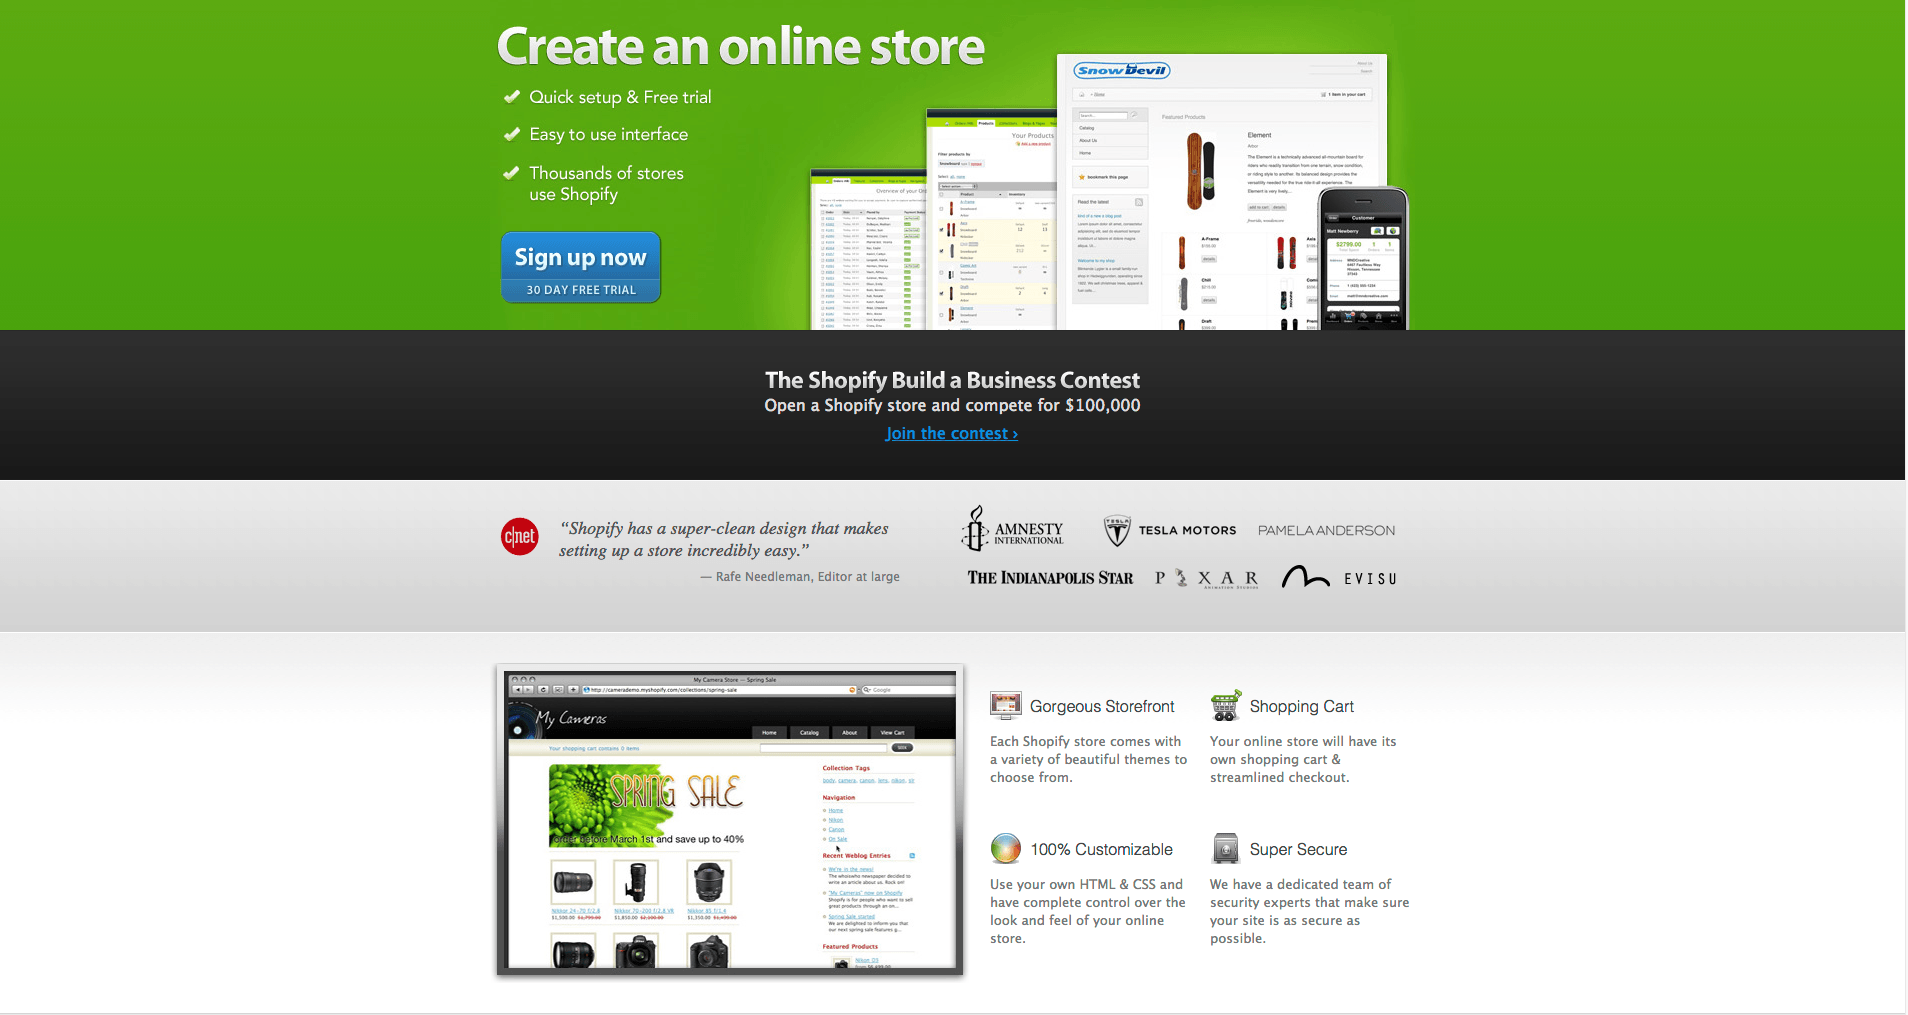 Shopify's website from a decade ago